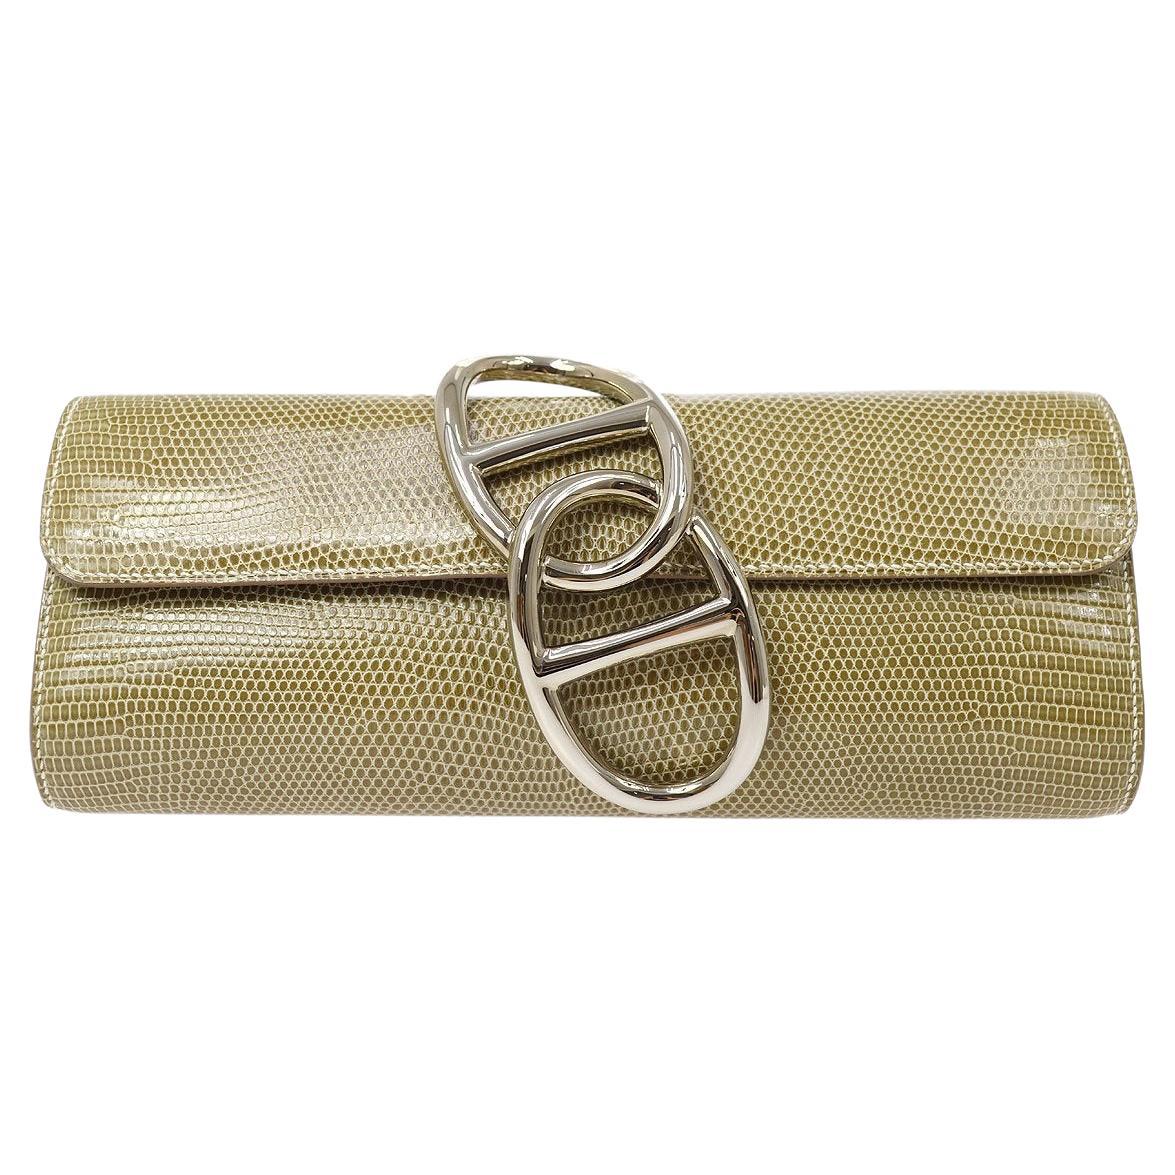 HERMES Egee Taupe Tan Ficelle Lizard Exotic Leather Silver Chaine Clutch Bag